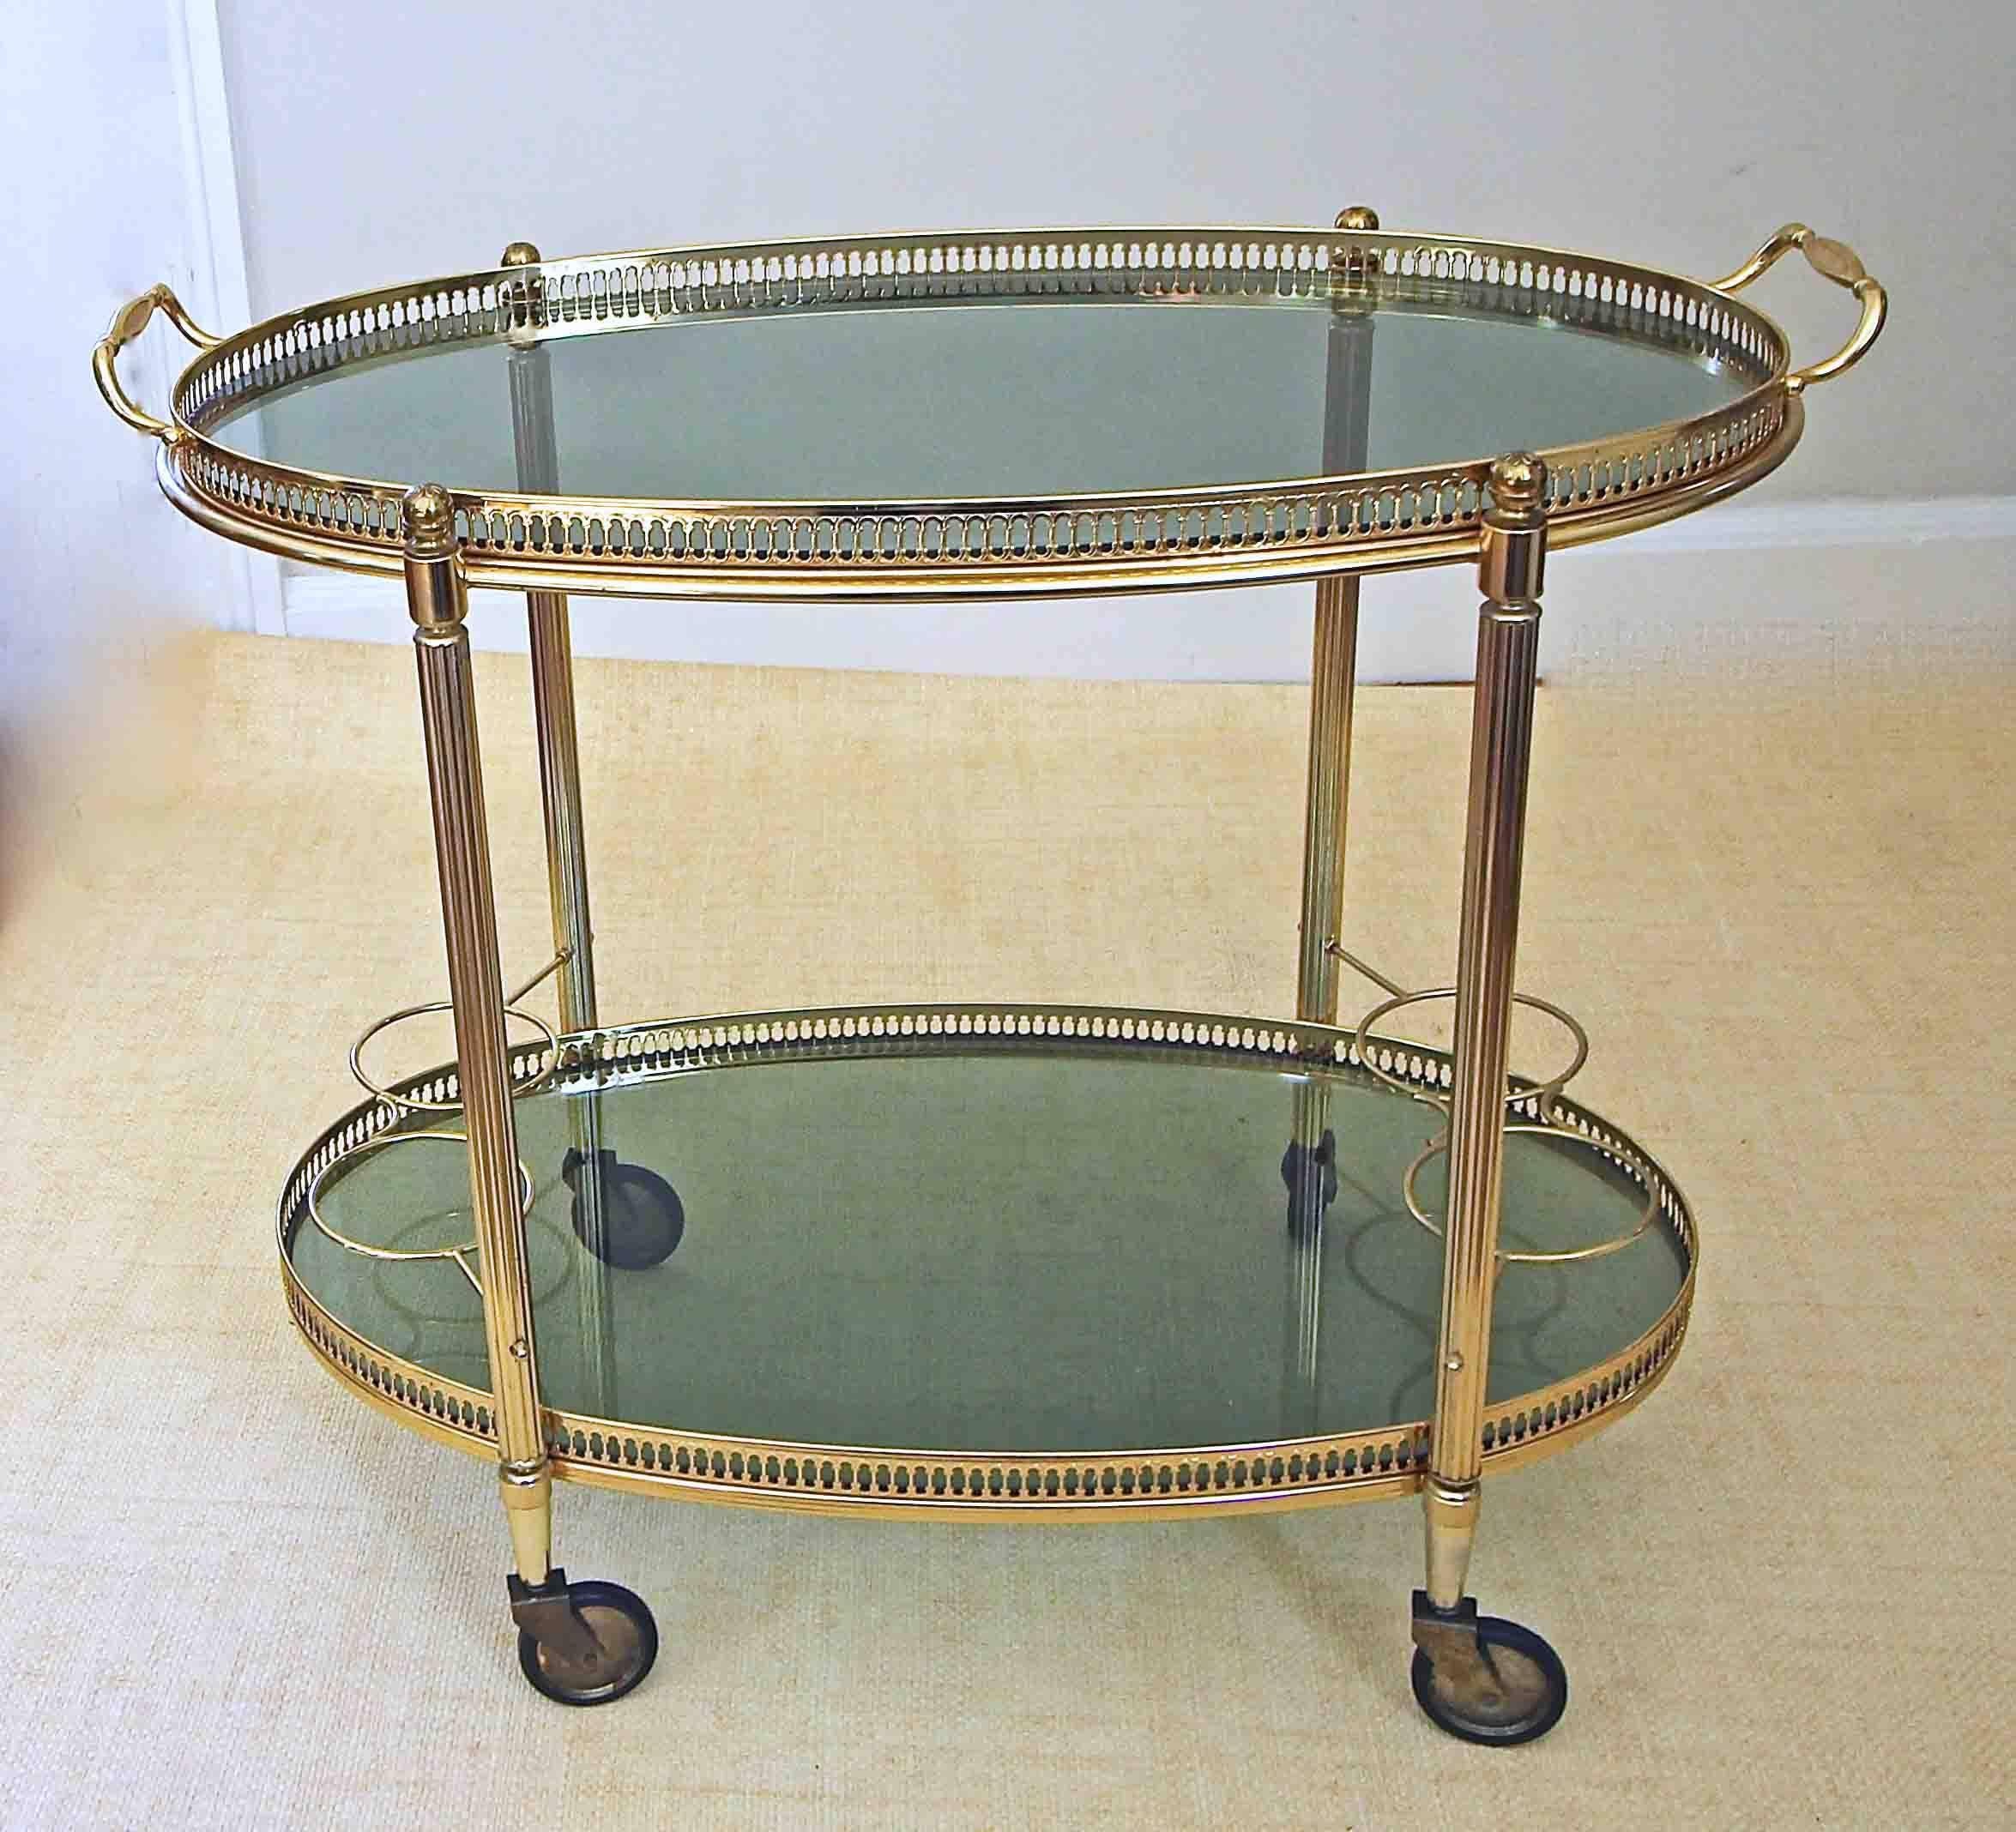 Diminutive brass-plated bar cart with removable glass tray, inset tinted glass resting on caster wheels. (Will ship partially unassembled.)